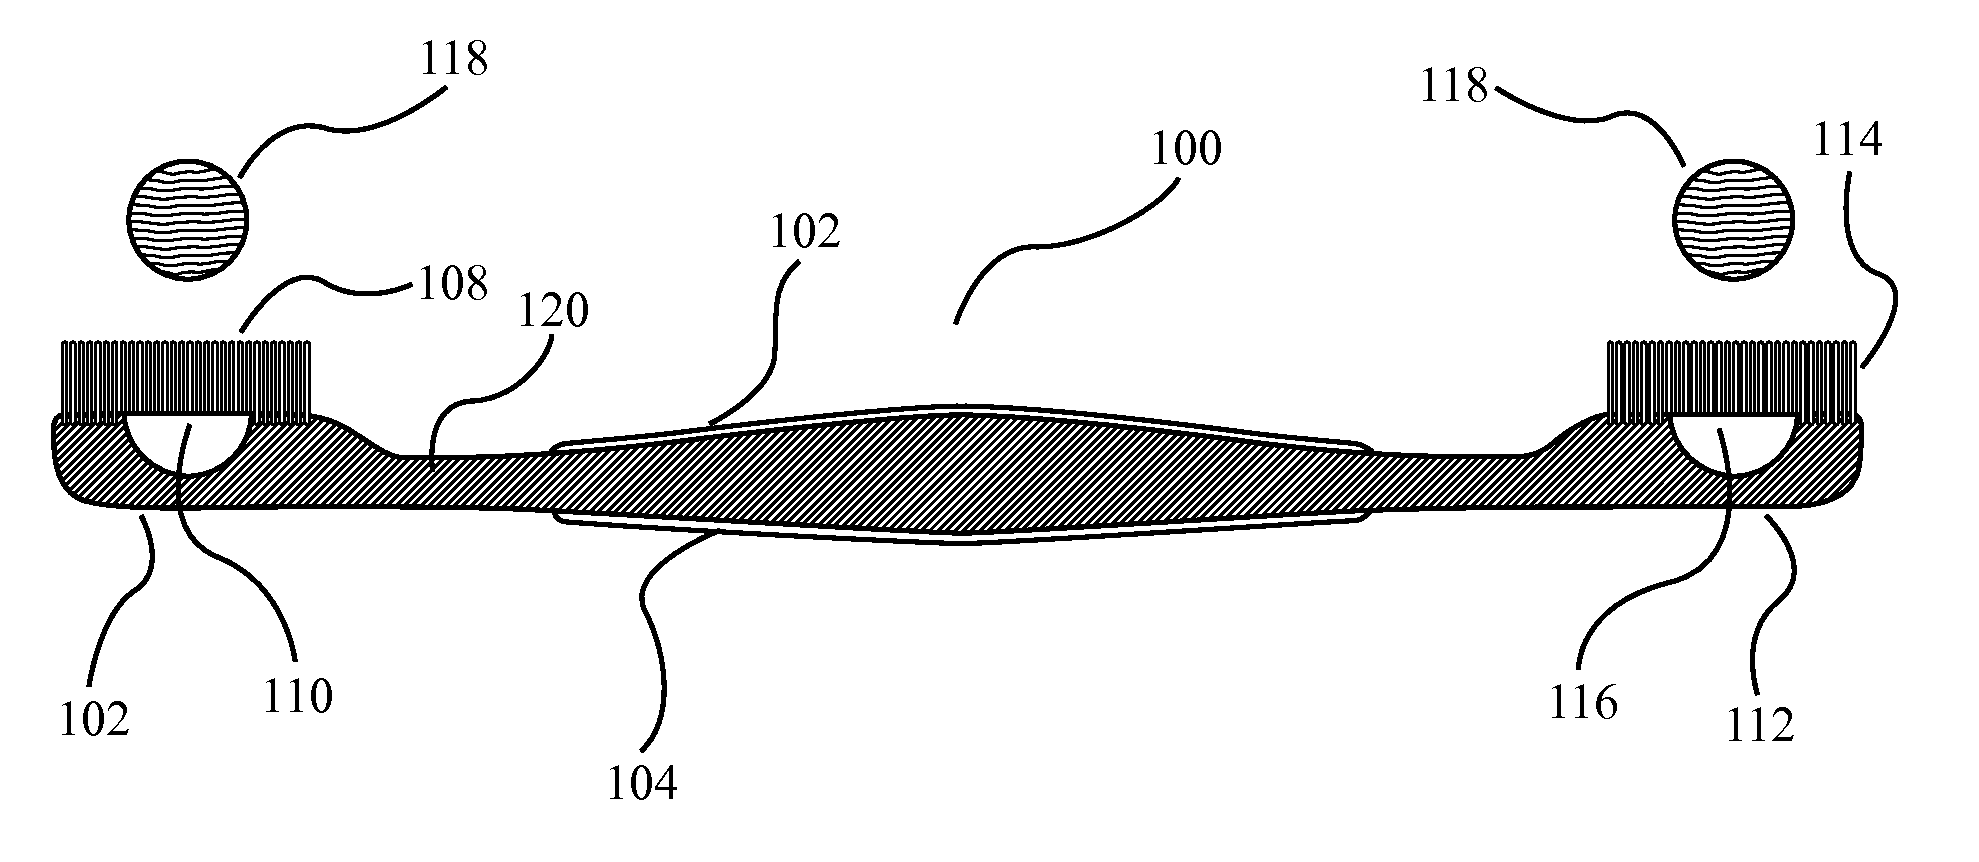 Oral hygiene implement and method of use